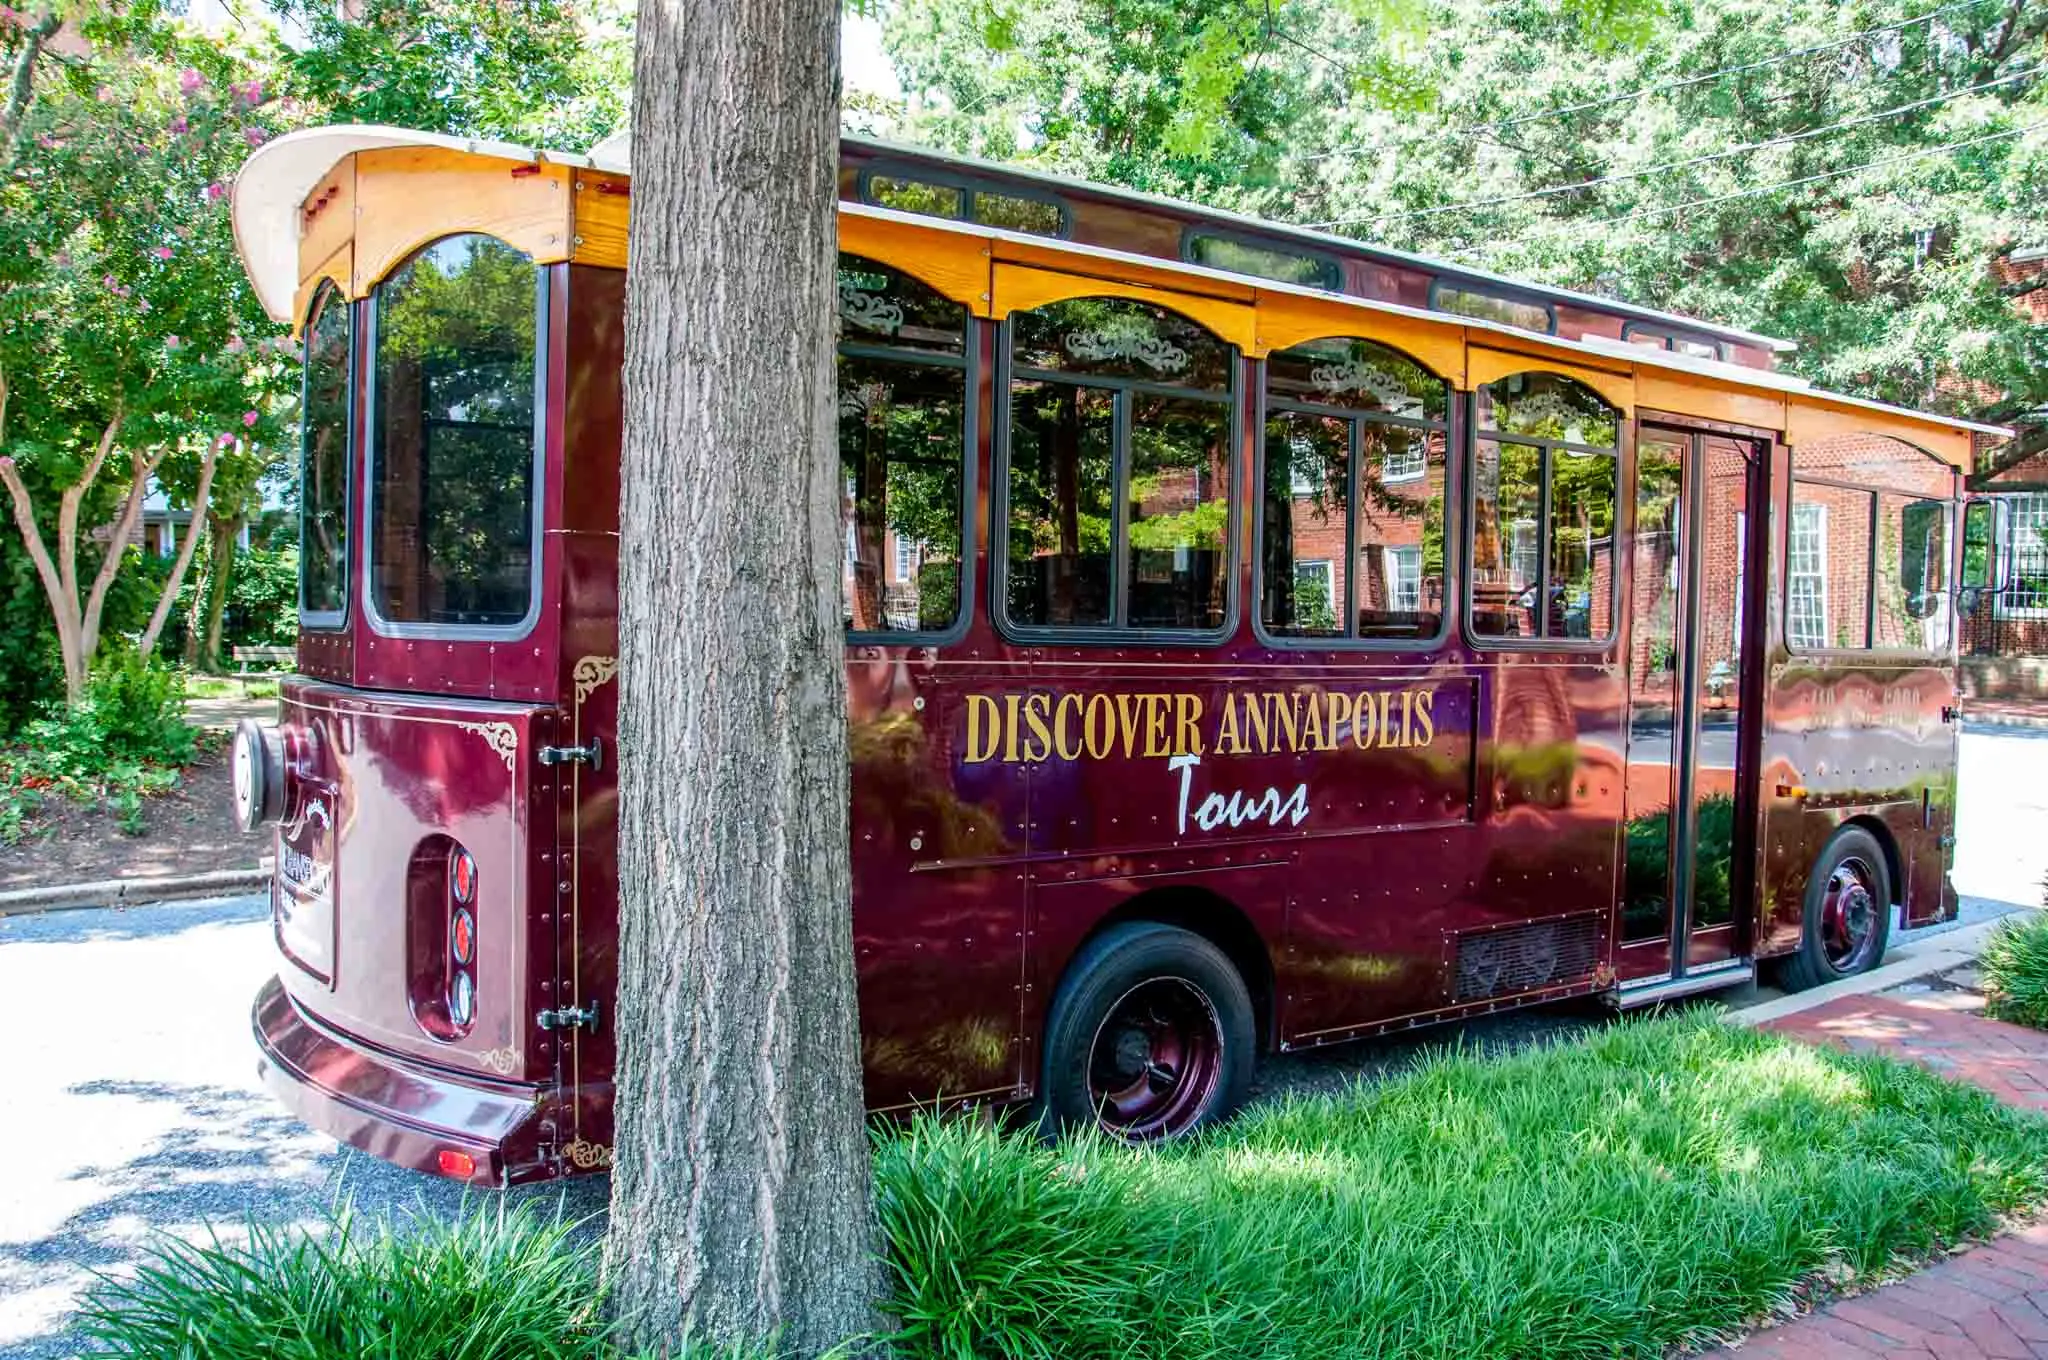 Red trolley car with "Discover Annapolis Tours" written on the side